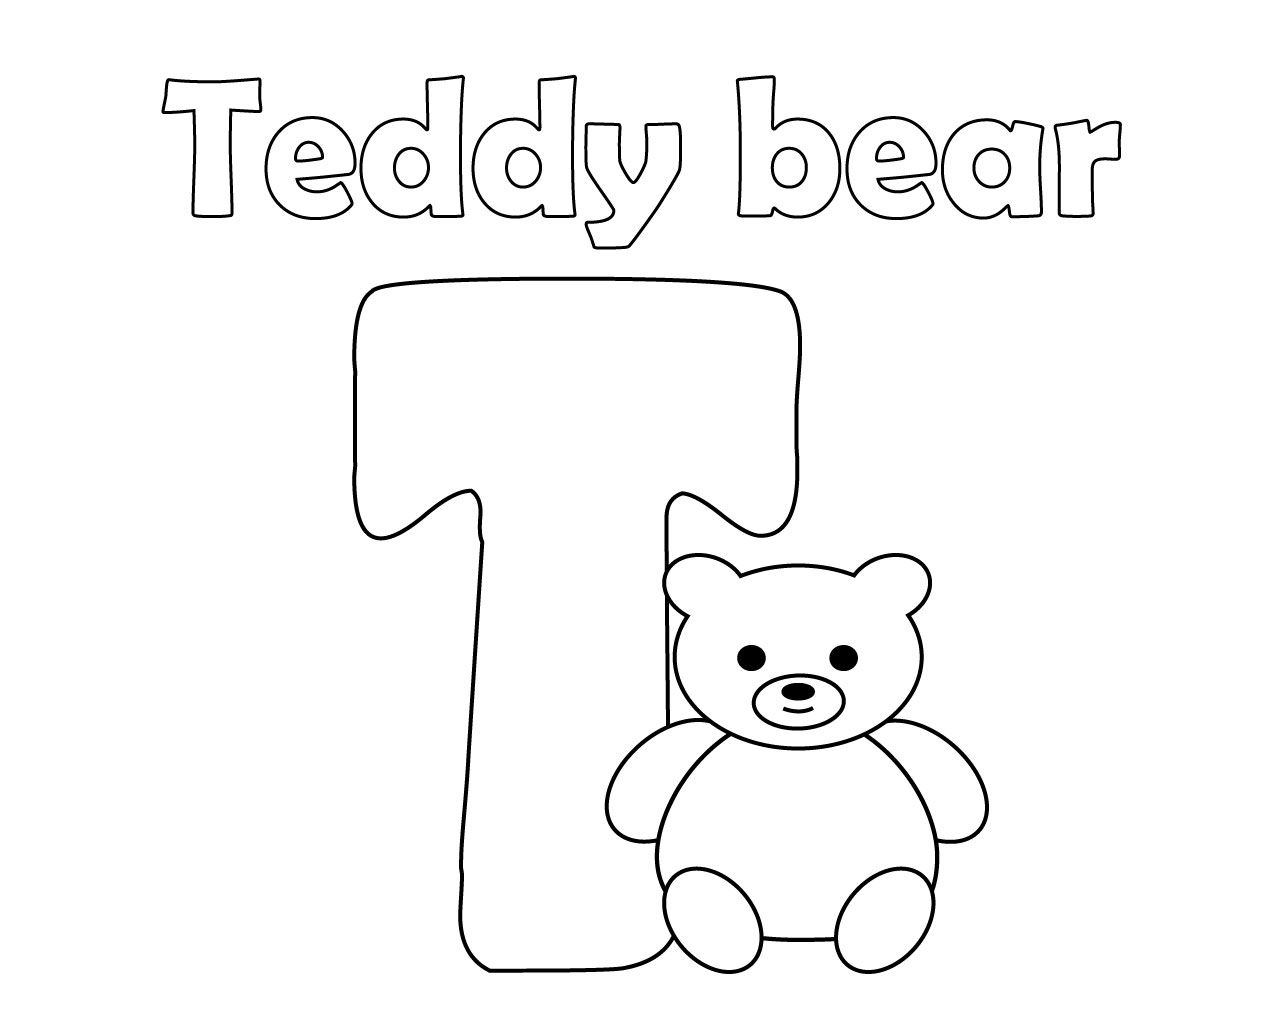 Free Printable Letter T Coloring Page For Kids Free within Letter T Worksheets Sparklebox